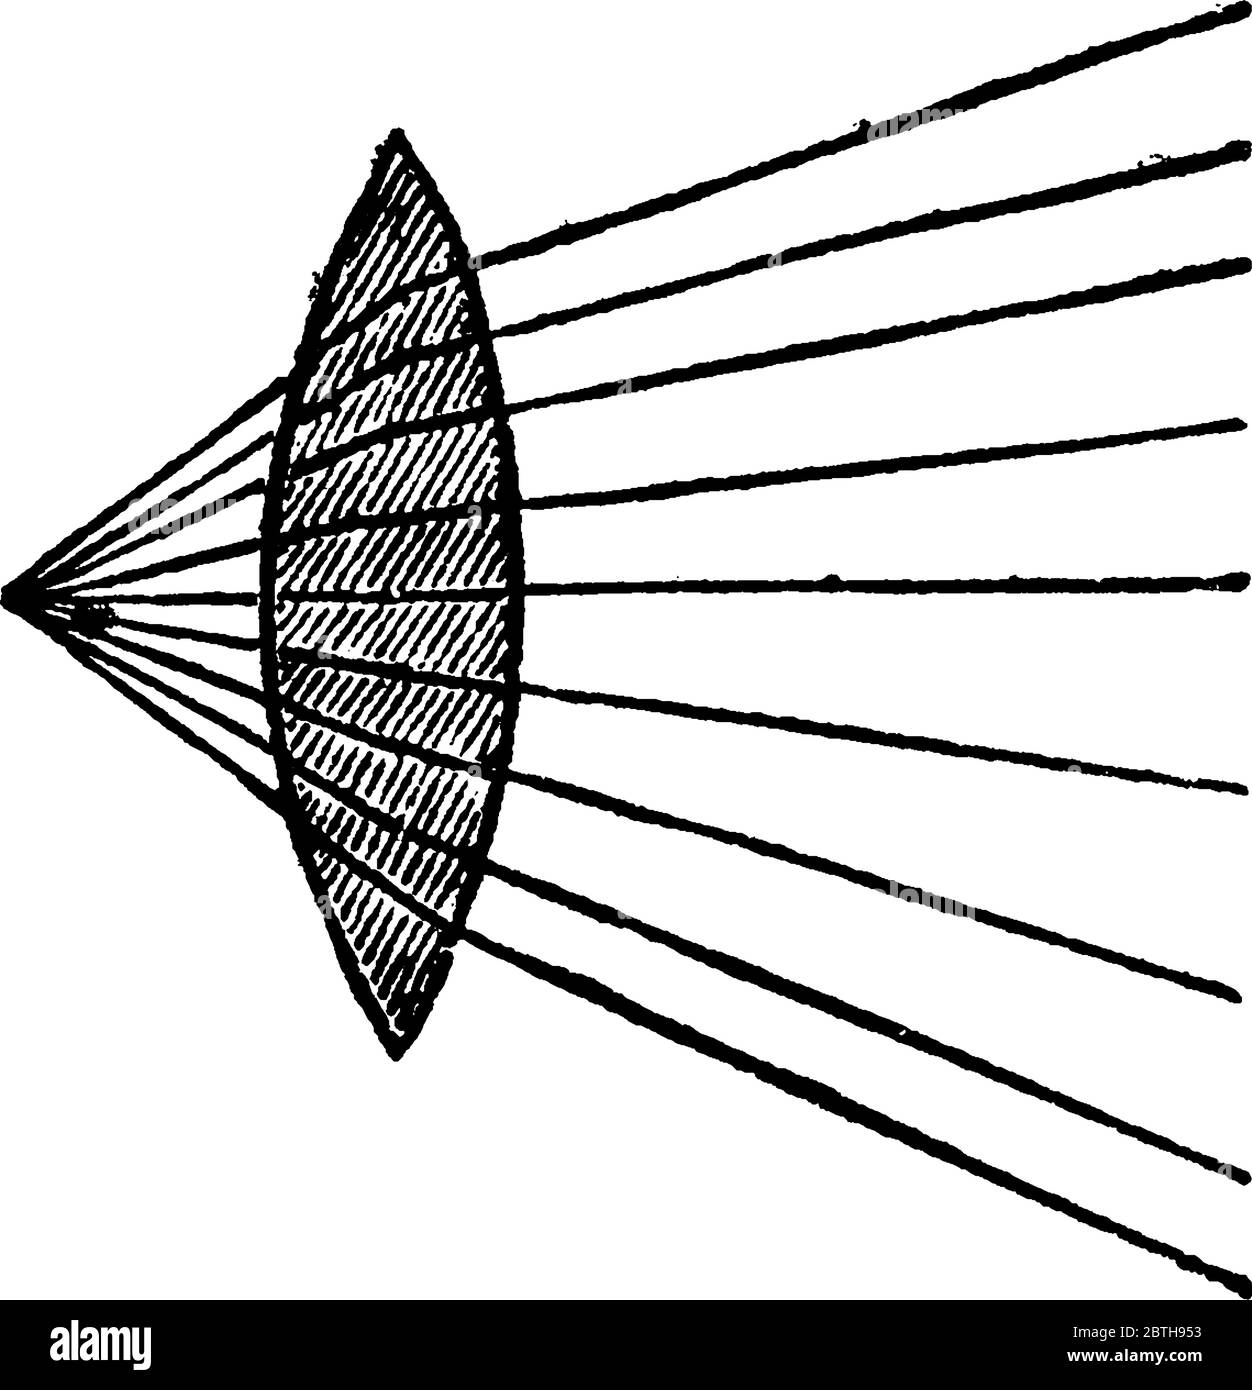 The figure shows the pencil of converging rays that are convergent as they pass through the lensand brought to a focus nearer the lens, in proportion Stock Vector